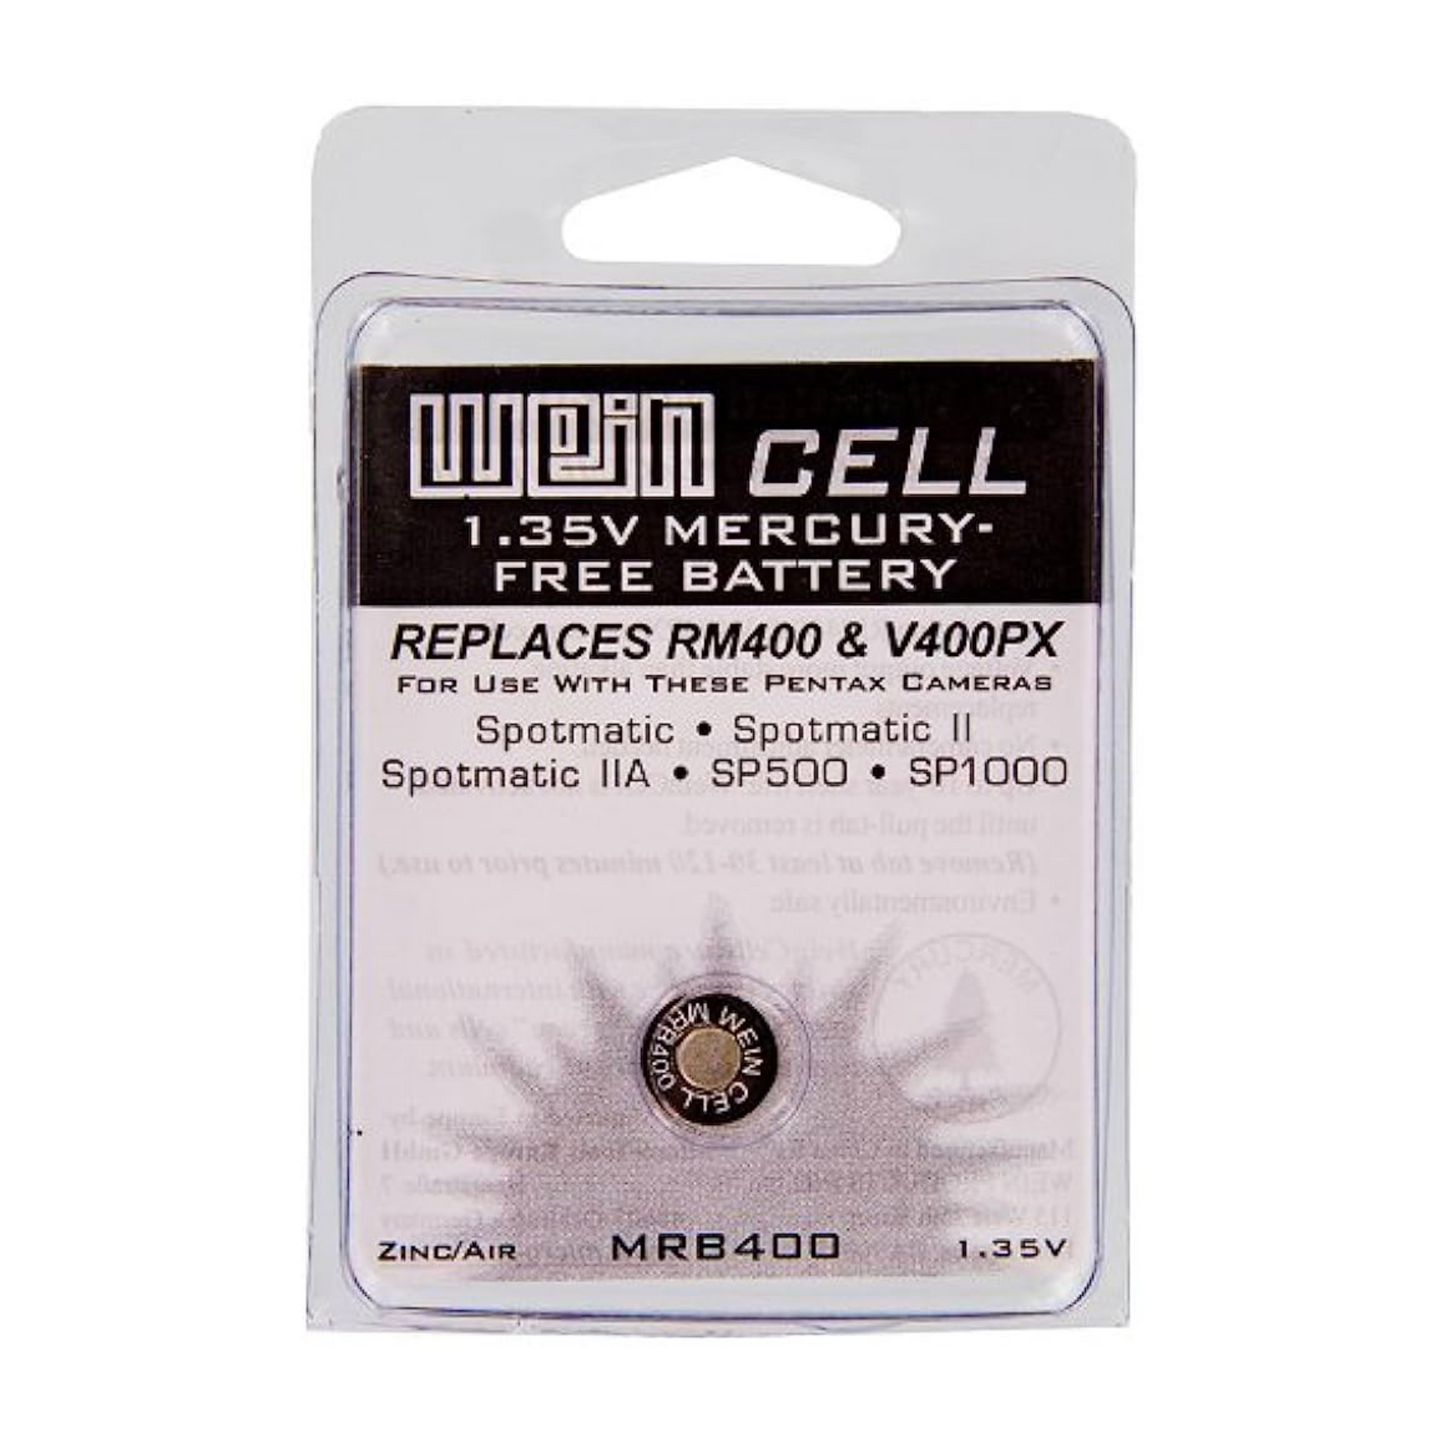 Weincell px400 mrb400 battery in blister packaging